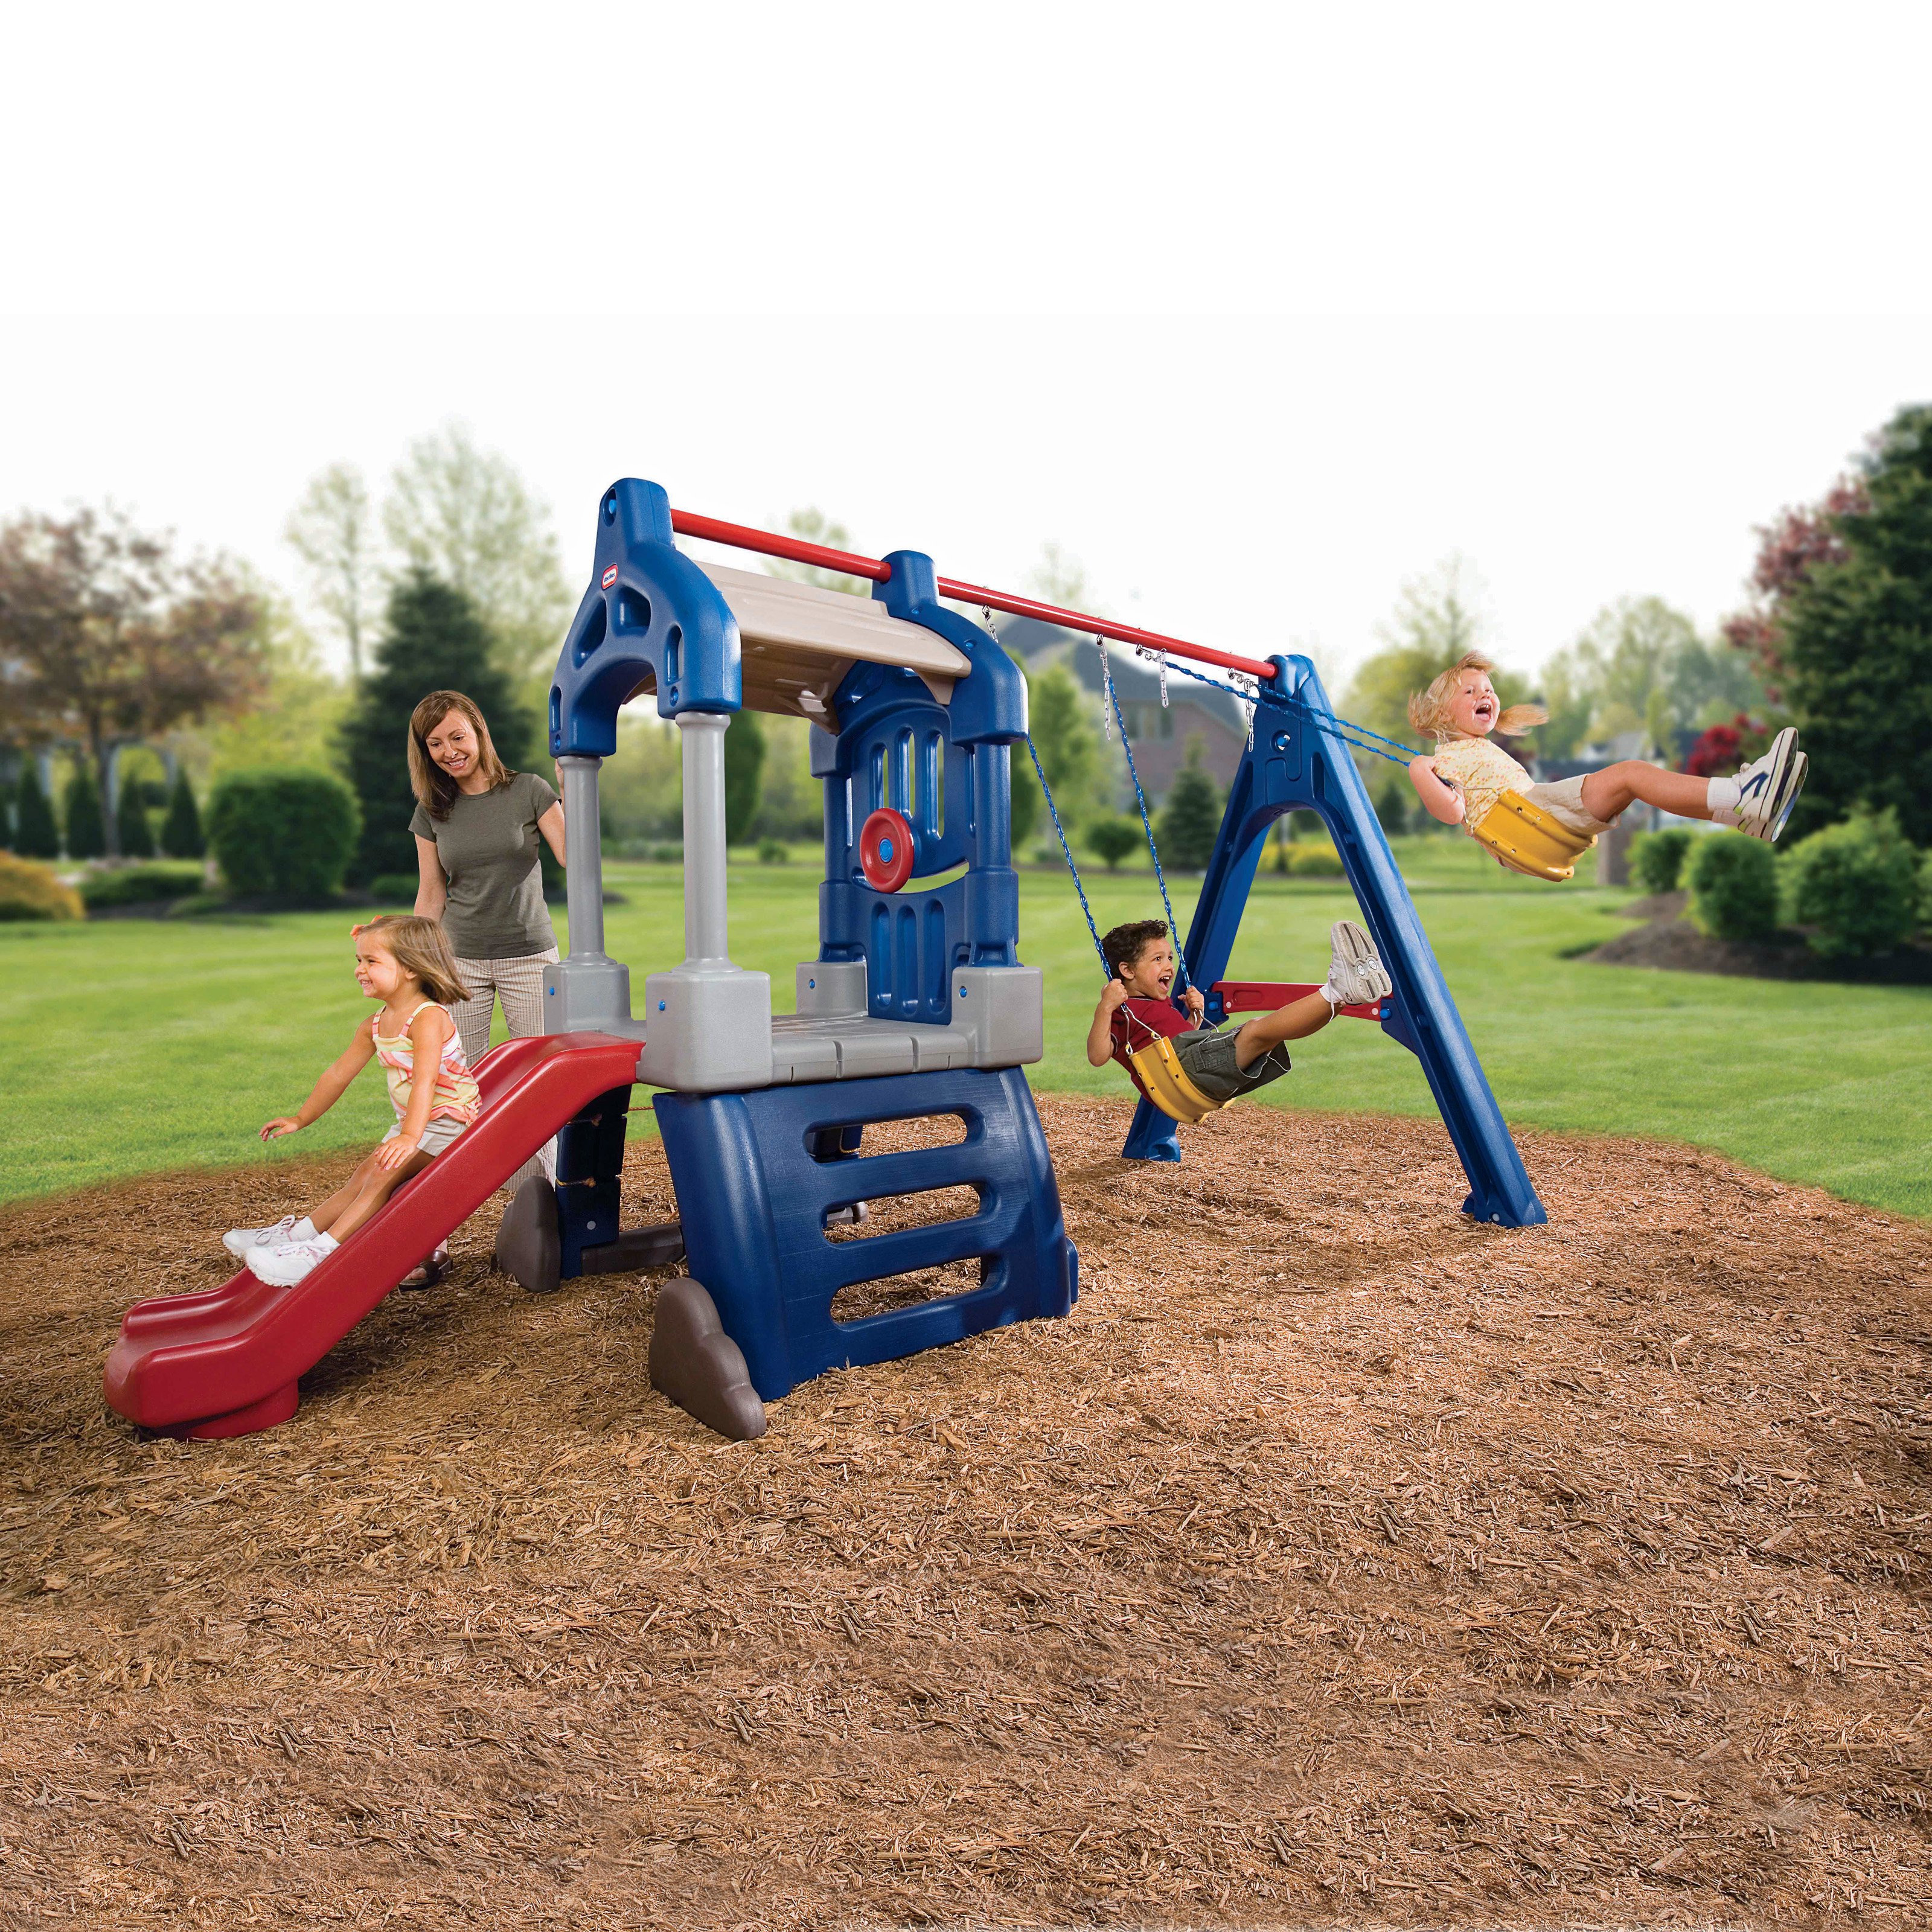 Little Tikes Clubhouse Swing Set - image 3 of 5